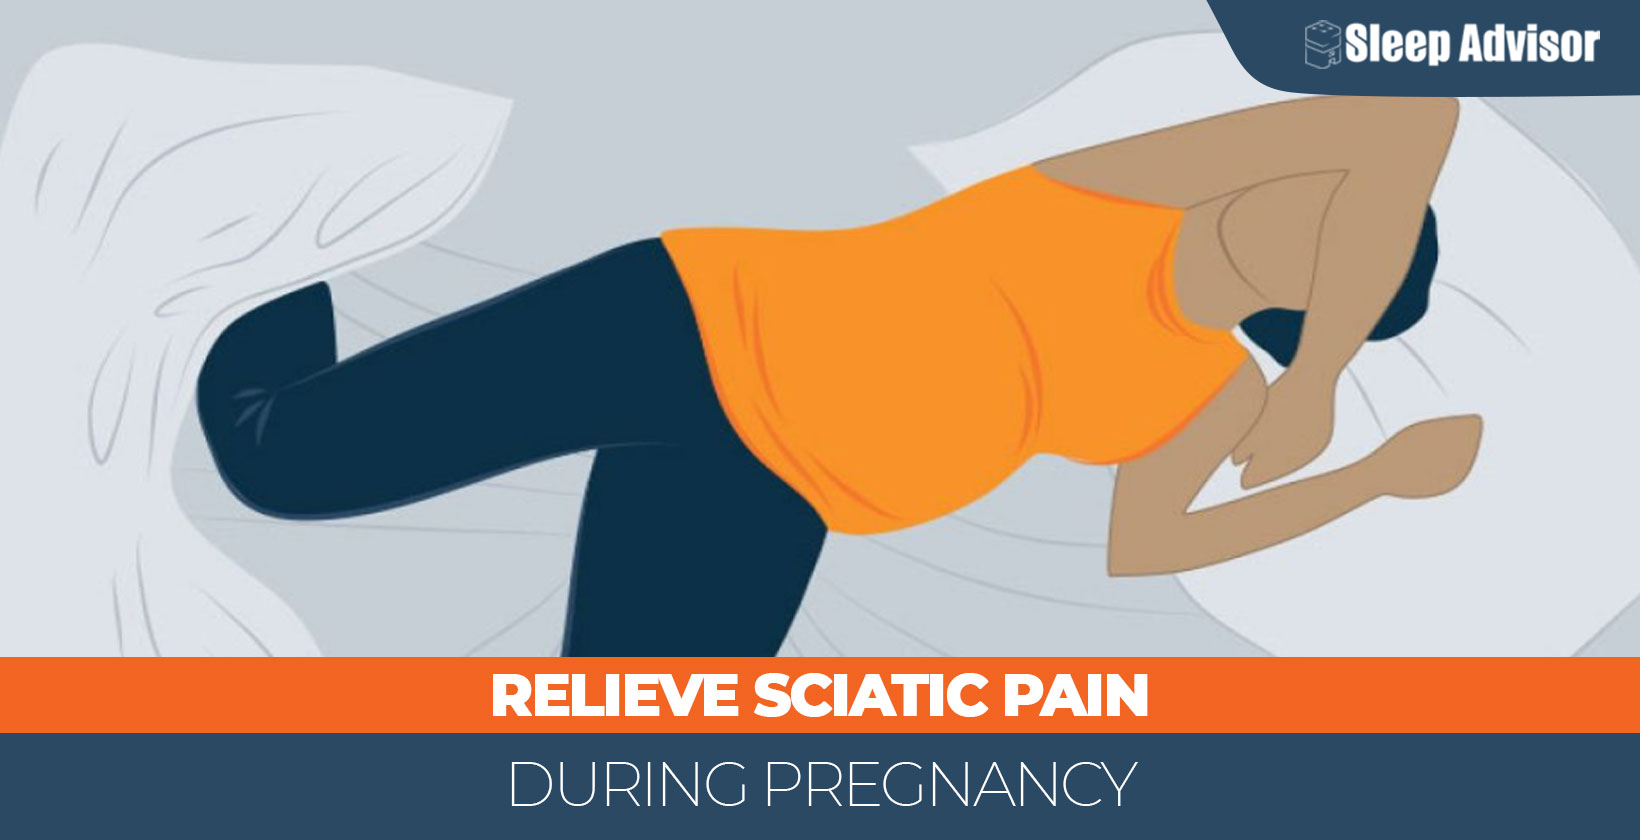 Relieve Sciatic Pain During Pregnancy 1640x840px